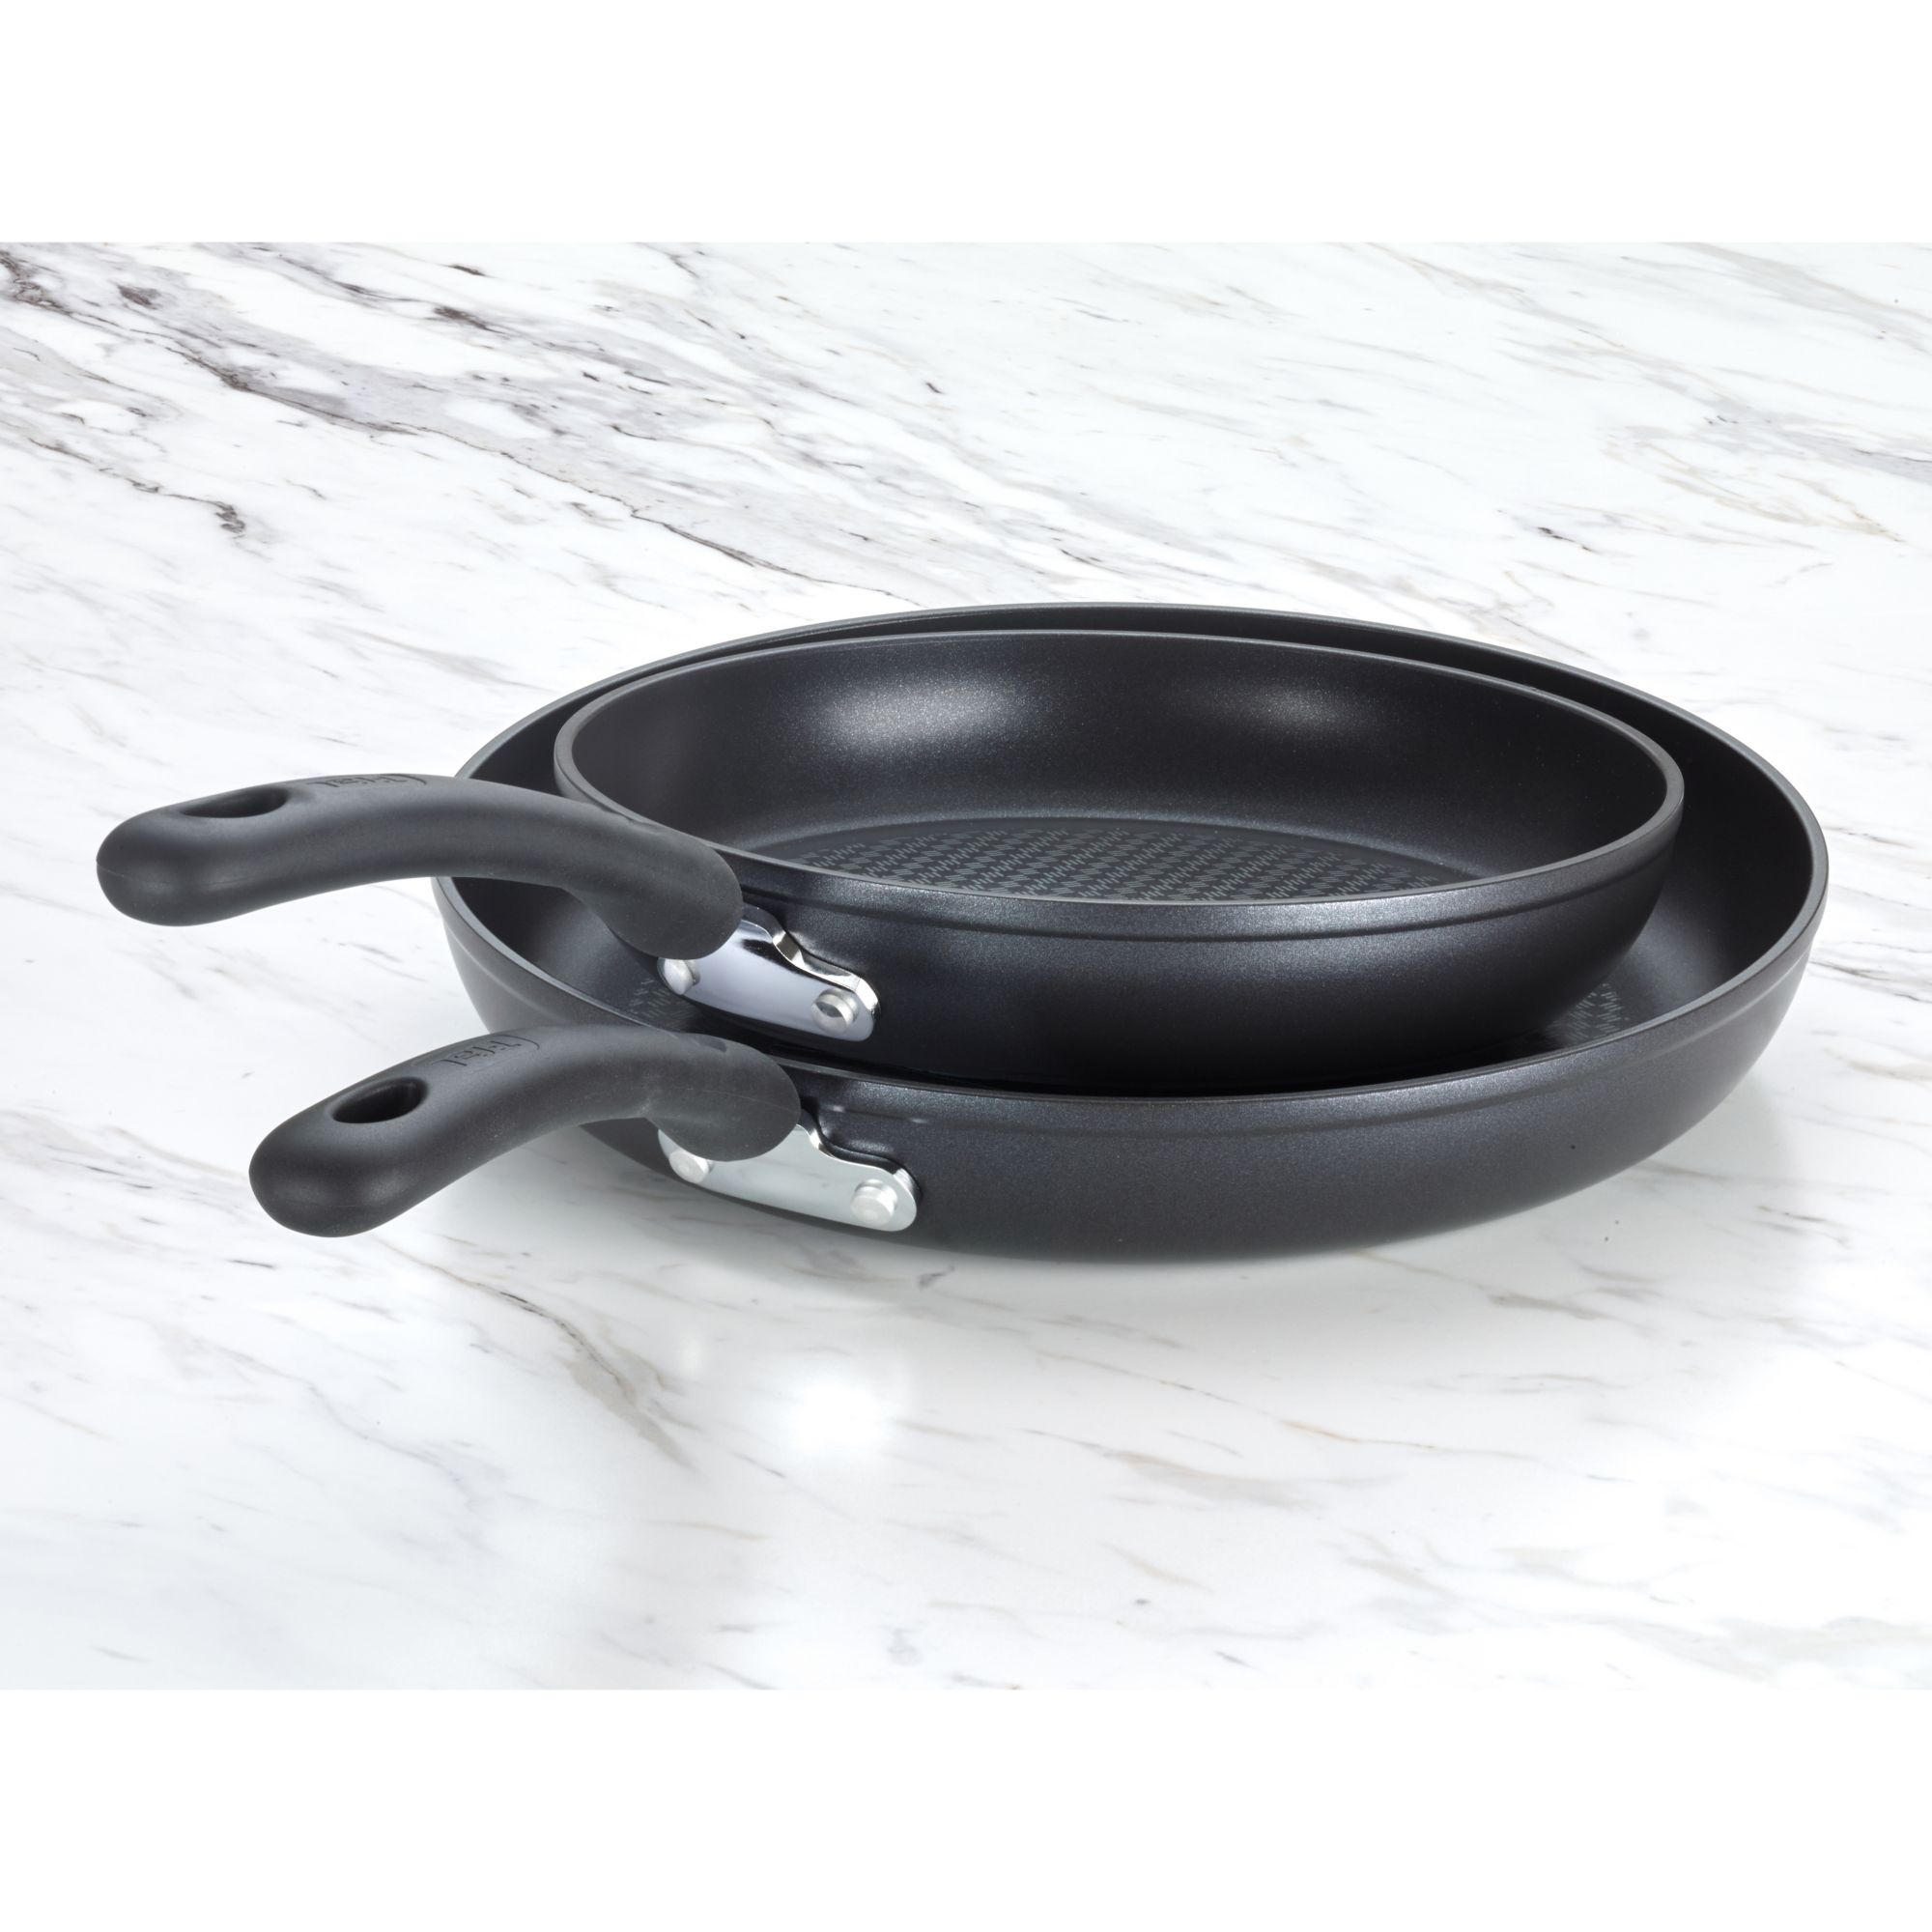 T-fal 10-pc Forged Non-Stick Cookware Set